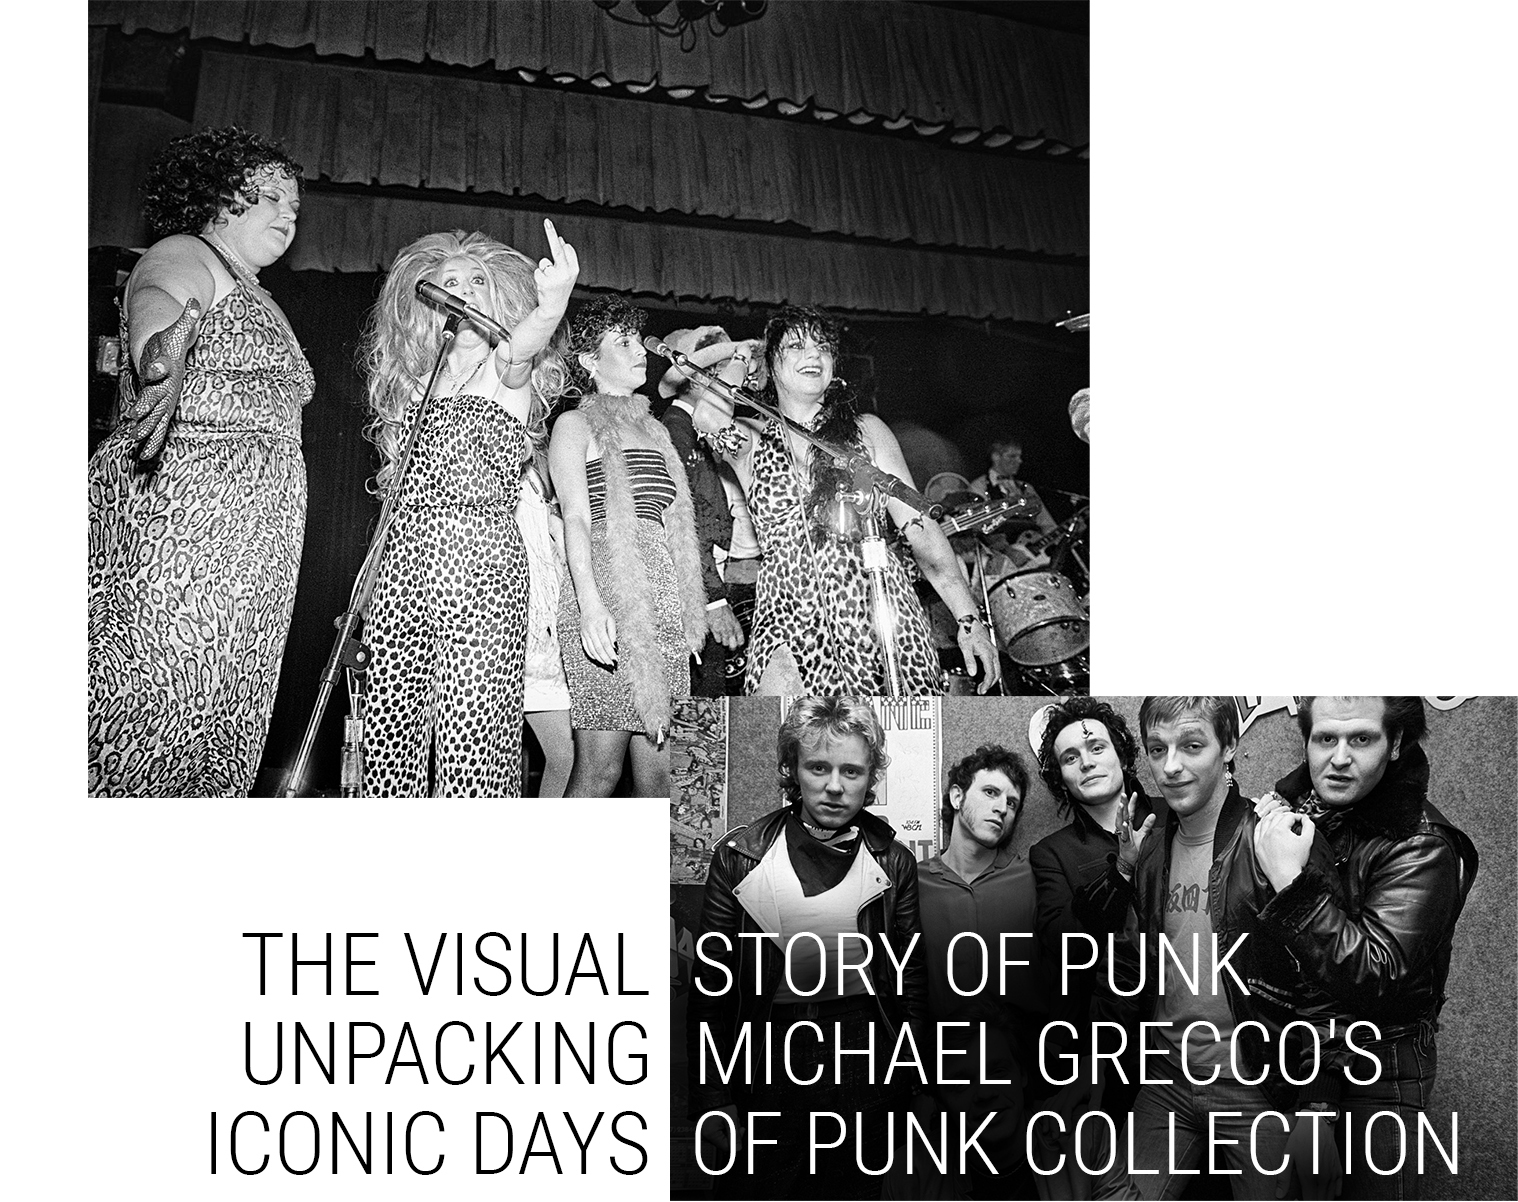 The-Visual-Story-of-Punk-Unpacking-Michael-Greccos-Iconic-Days-of-Punk-Collection_header3.jpg